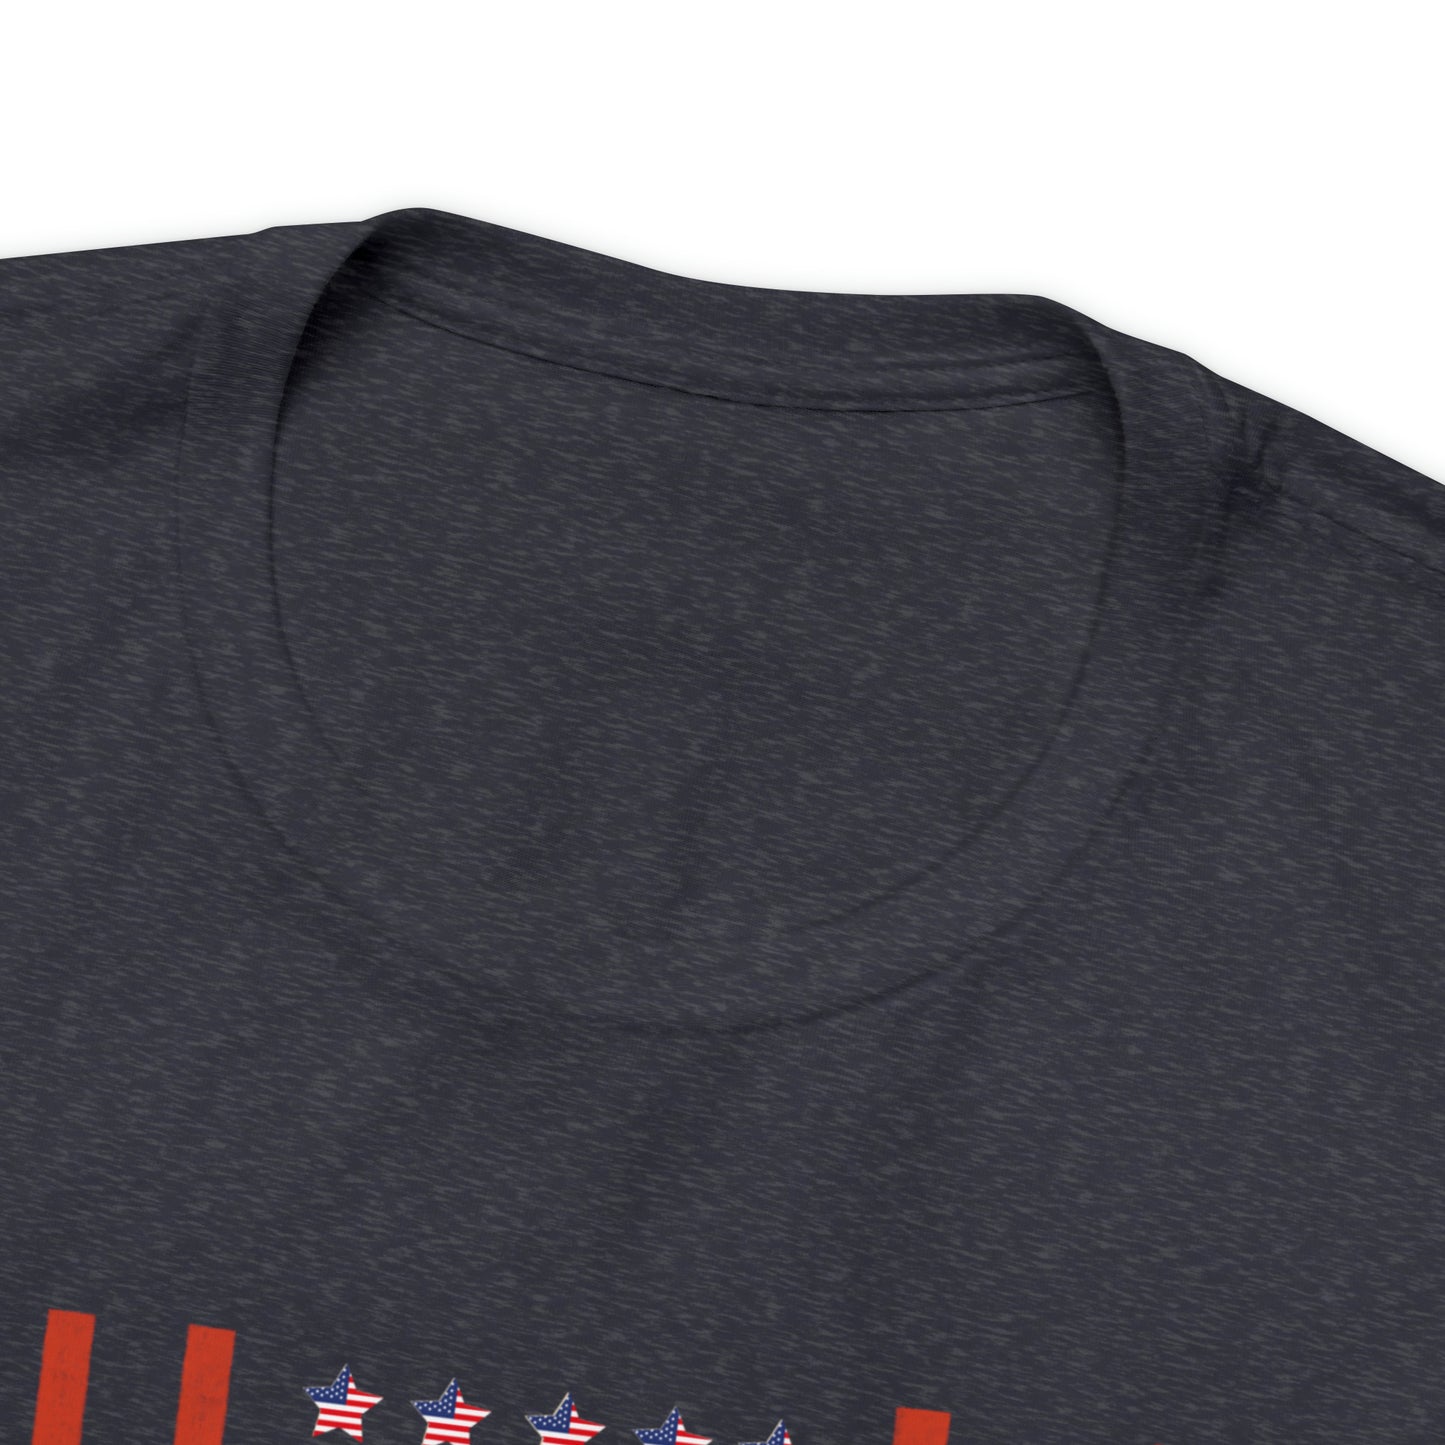 Express Your Patriotism with 4th of July Flag Shirt: Independence Day, Fireworks, Celebrating Freedom - Perfect for Women and Men